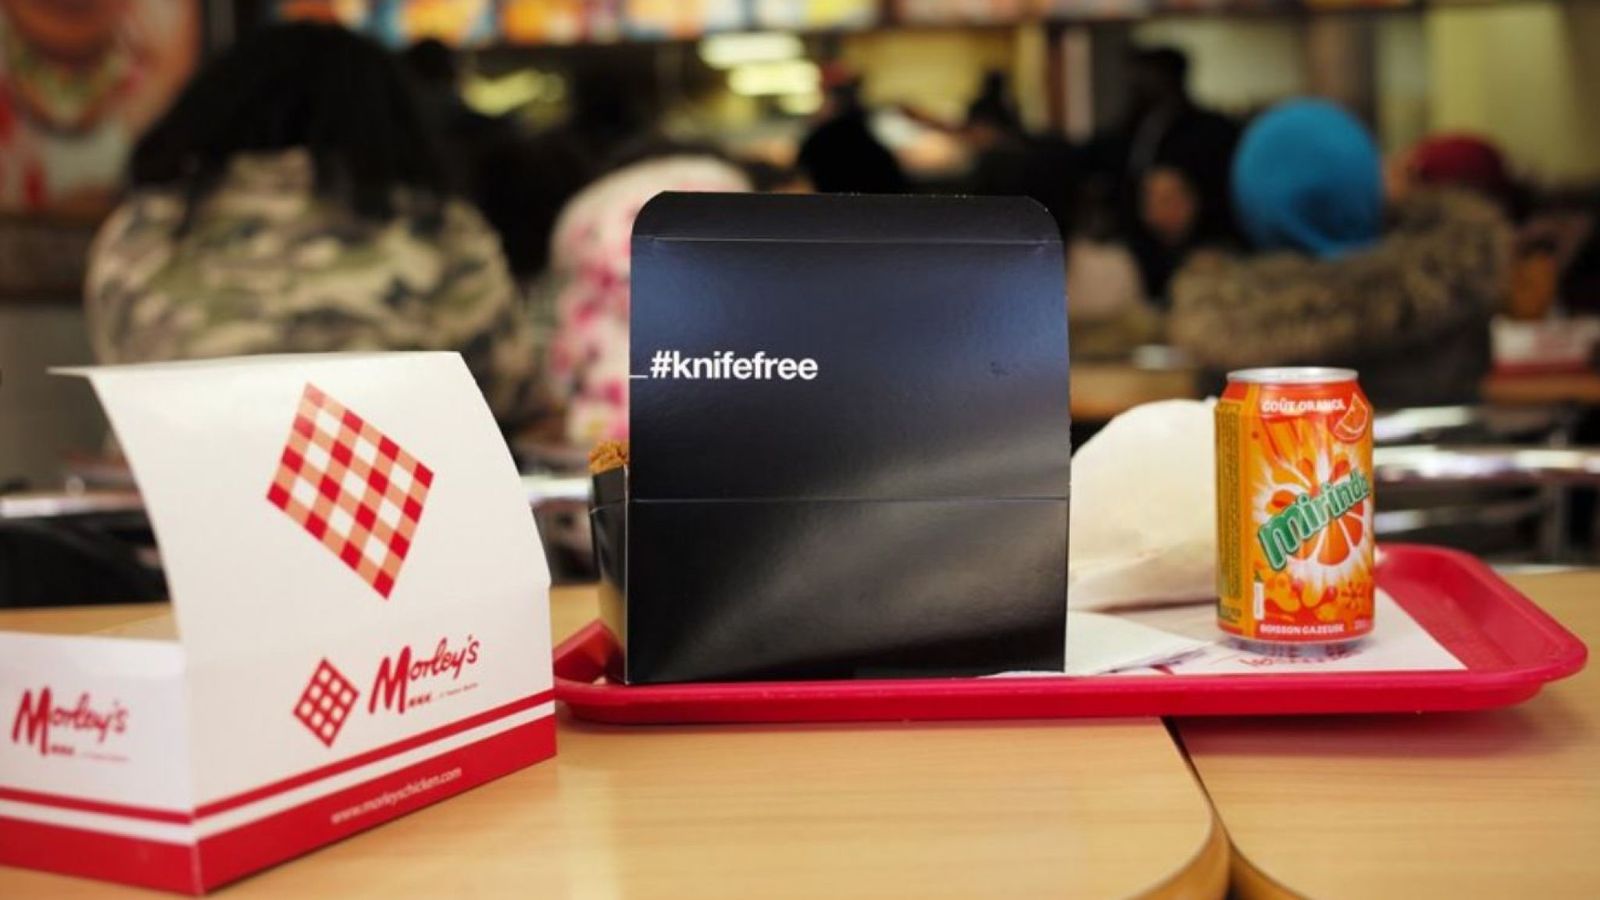 UK Home Office launches chicken shop packaging #knifefree campaign